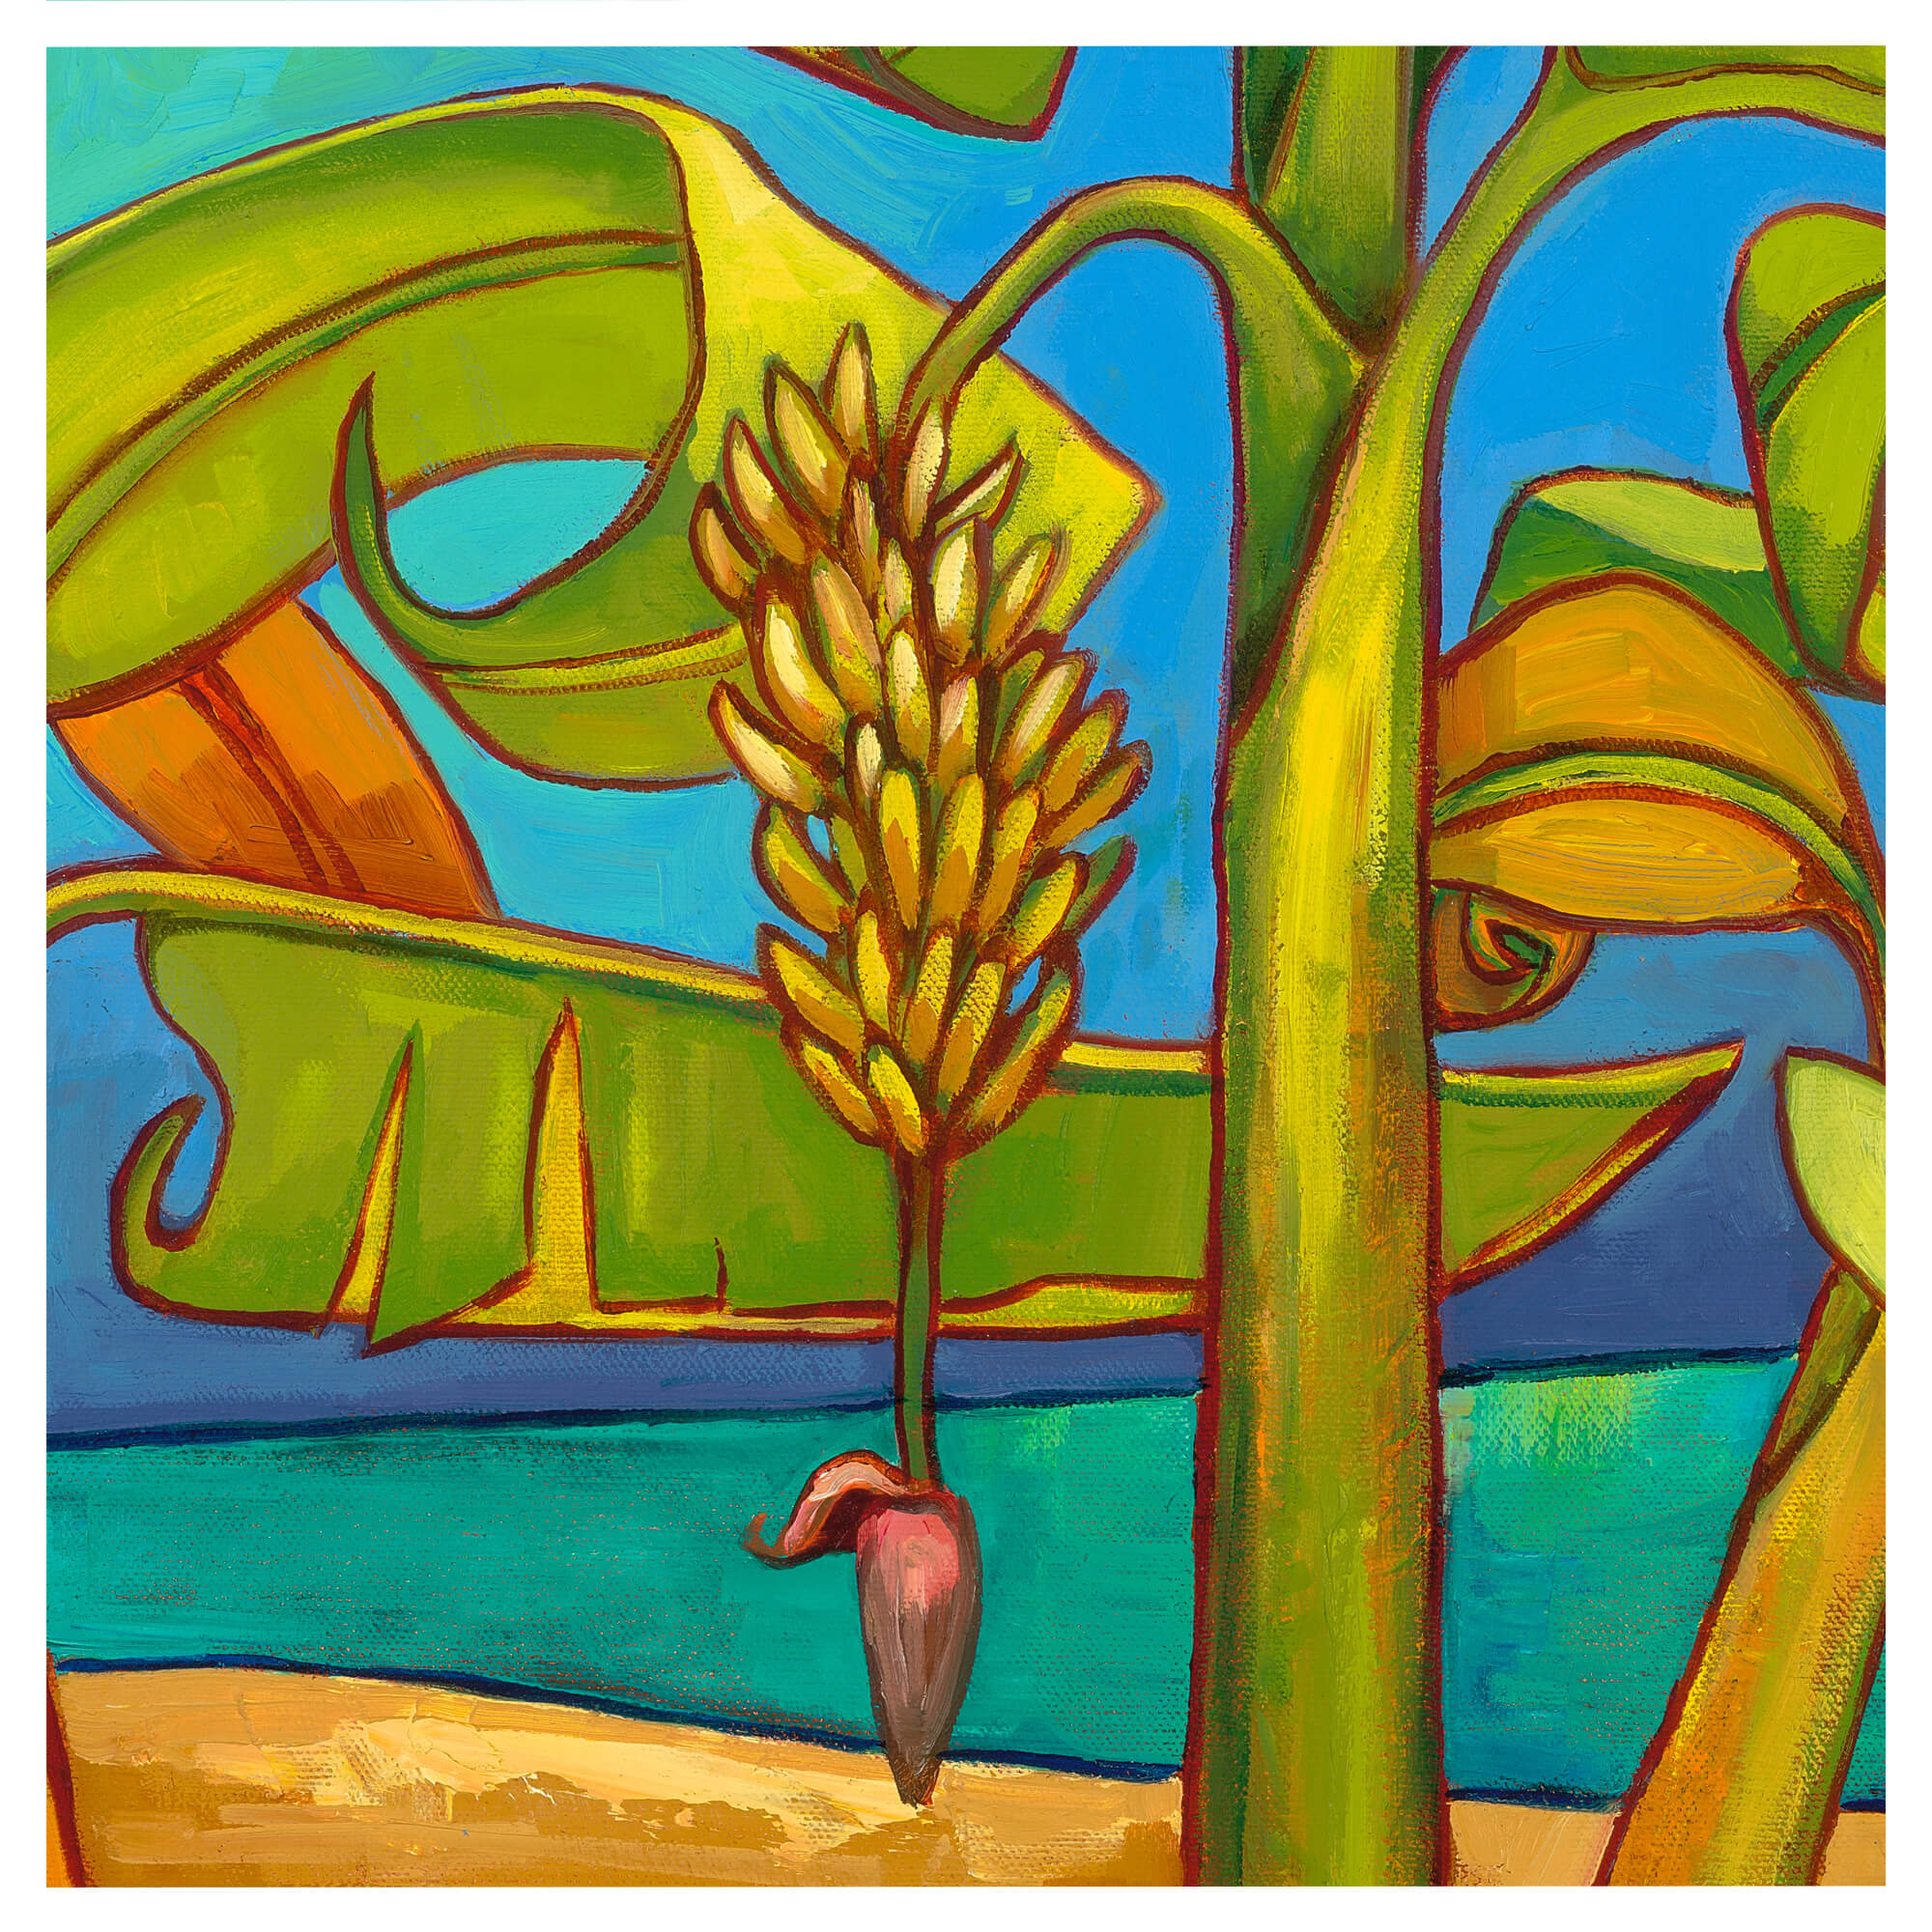 Fruit of a banana tree by Hawaii artist Colin Redican